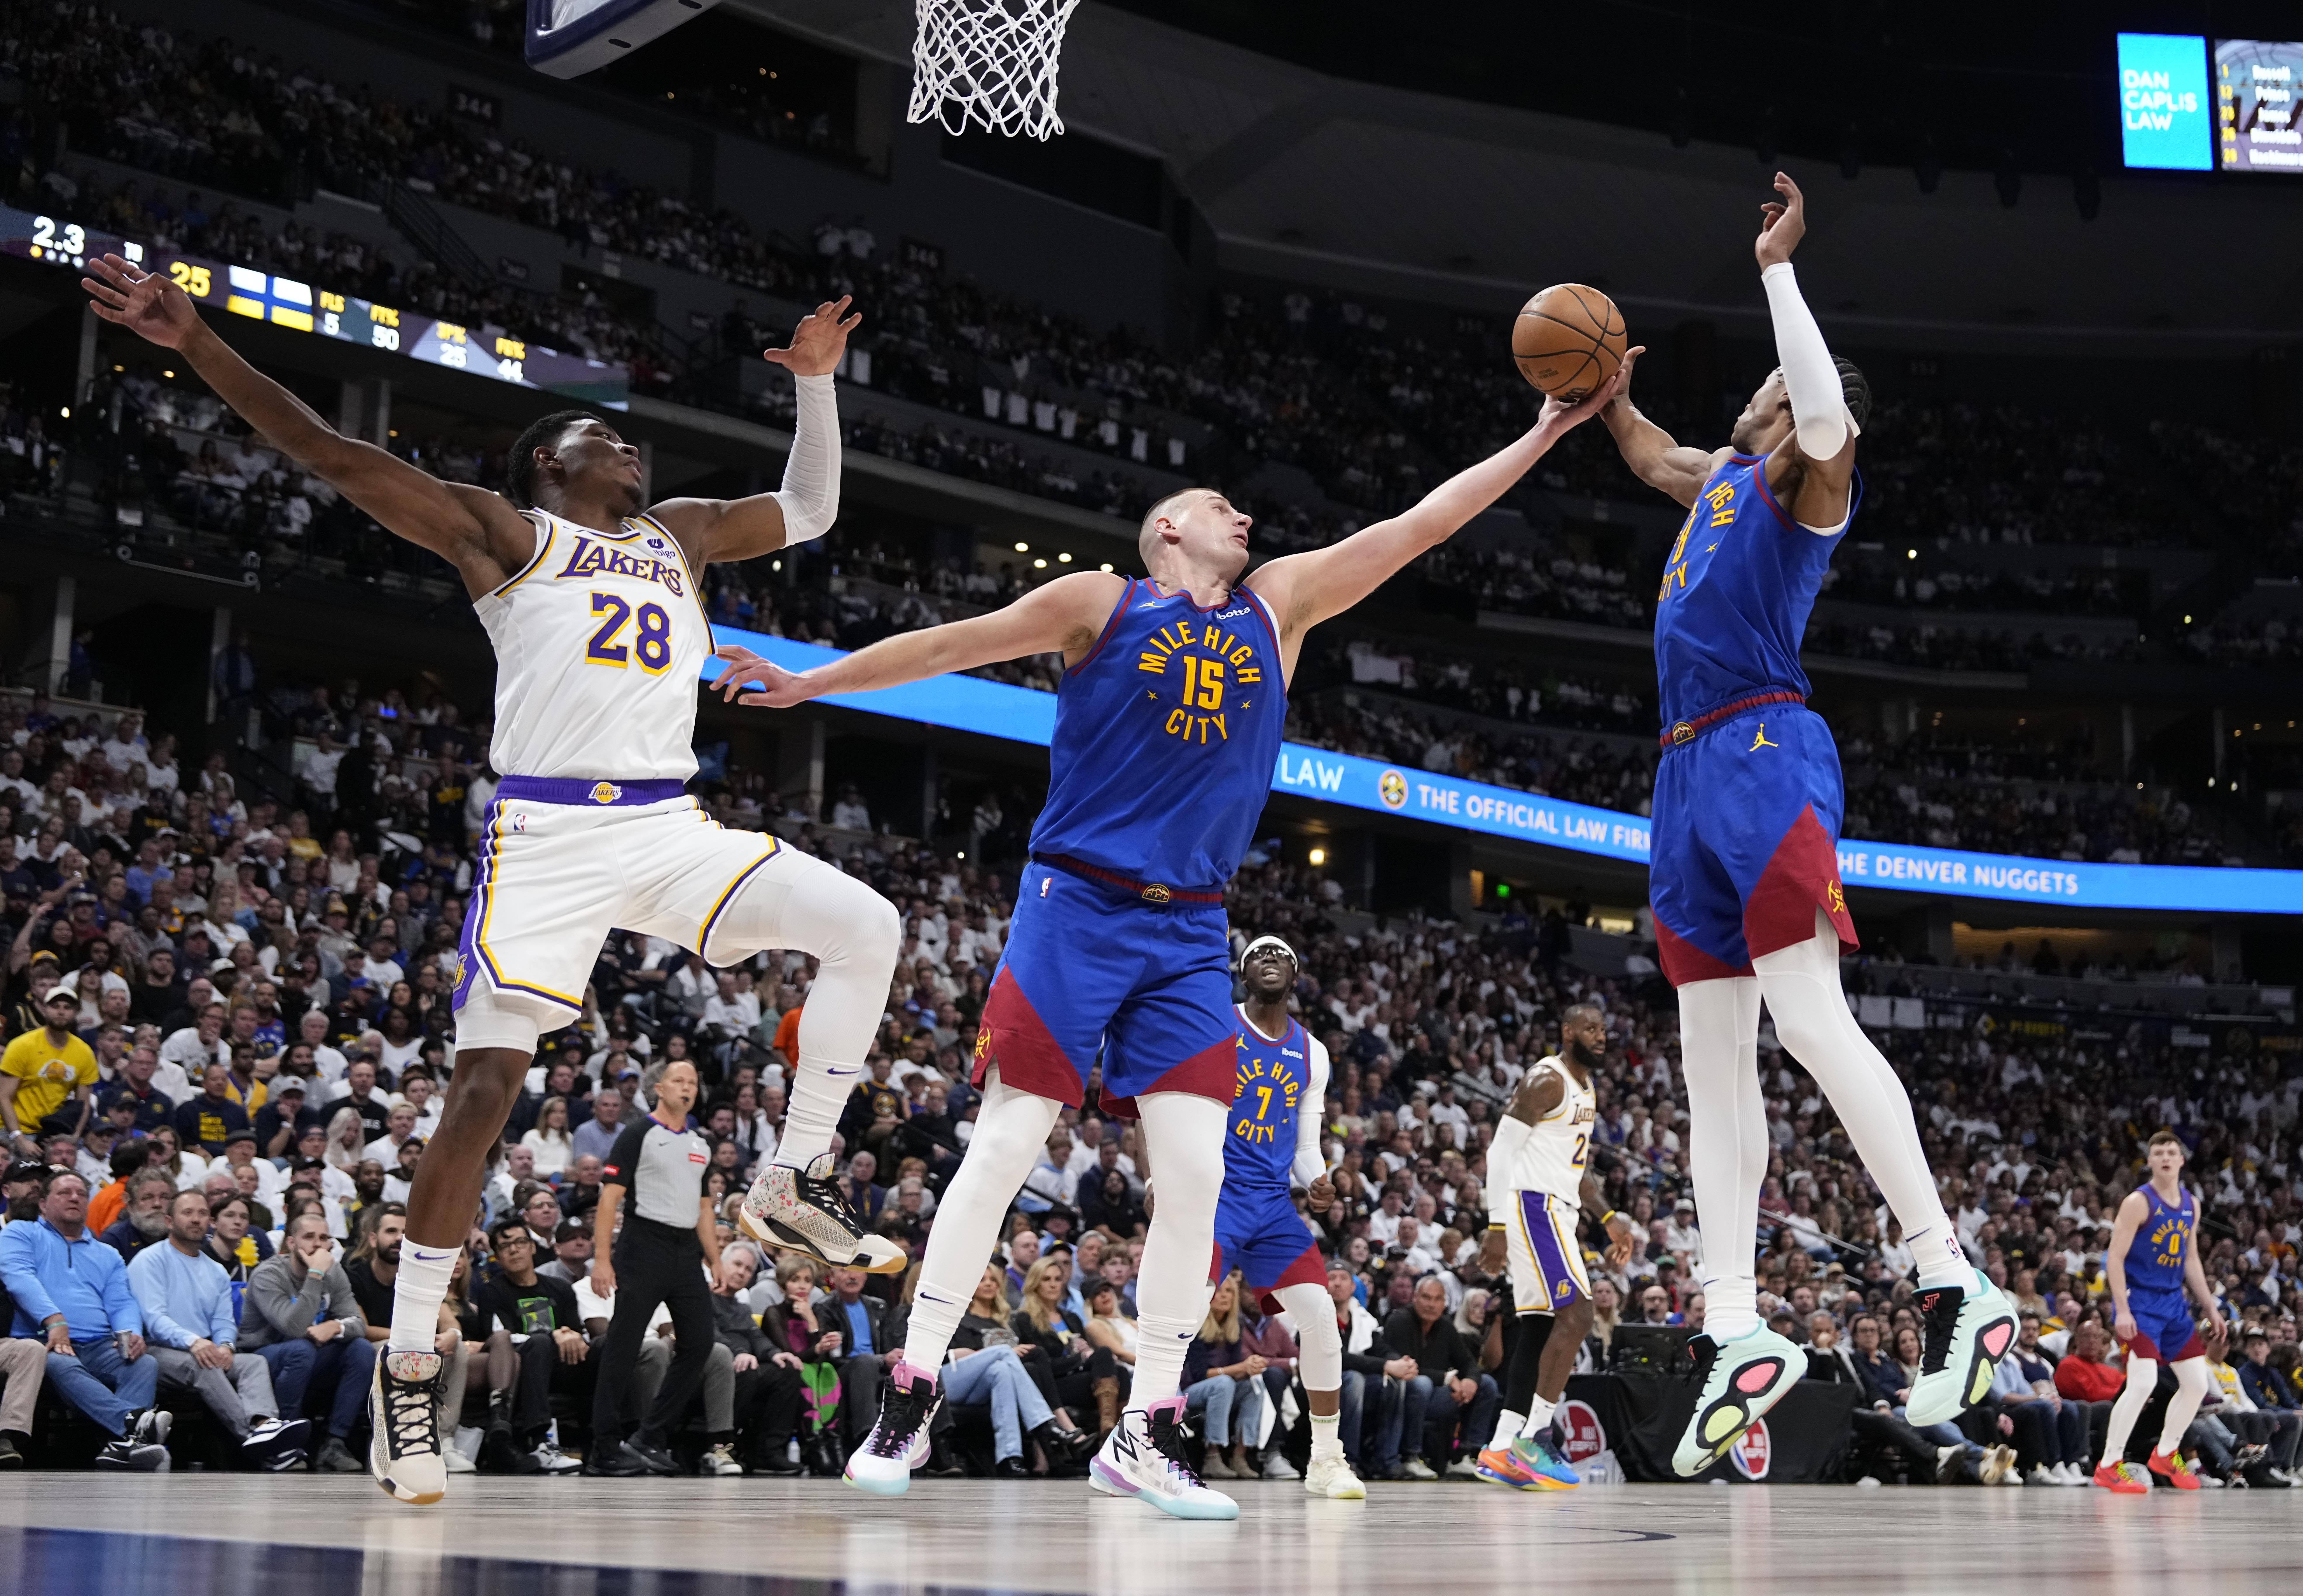 Nikola Jokic leads Denver Nuggets past LeBron James and Lakers 114-103 in playoff opener....